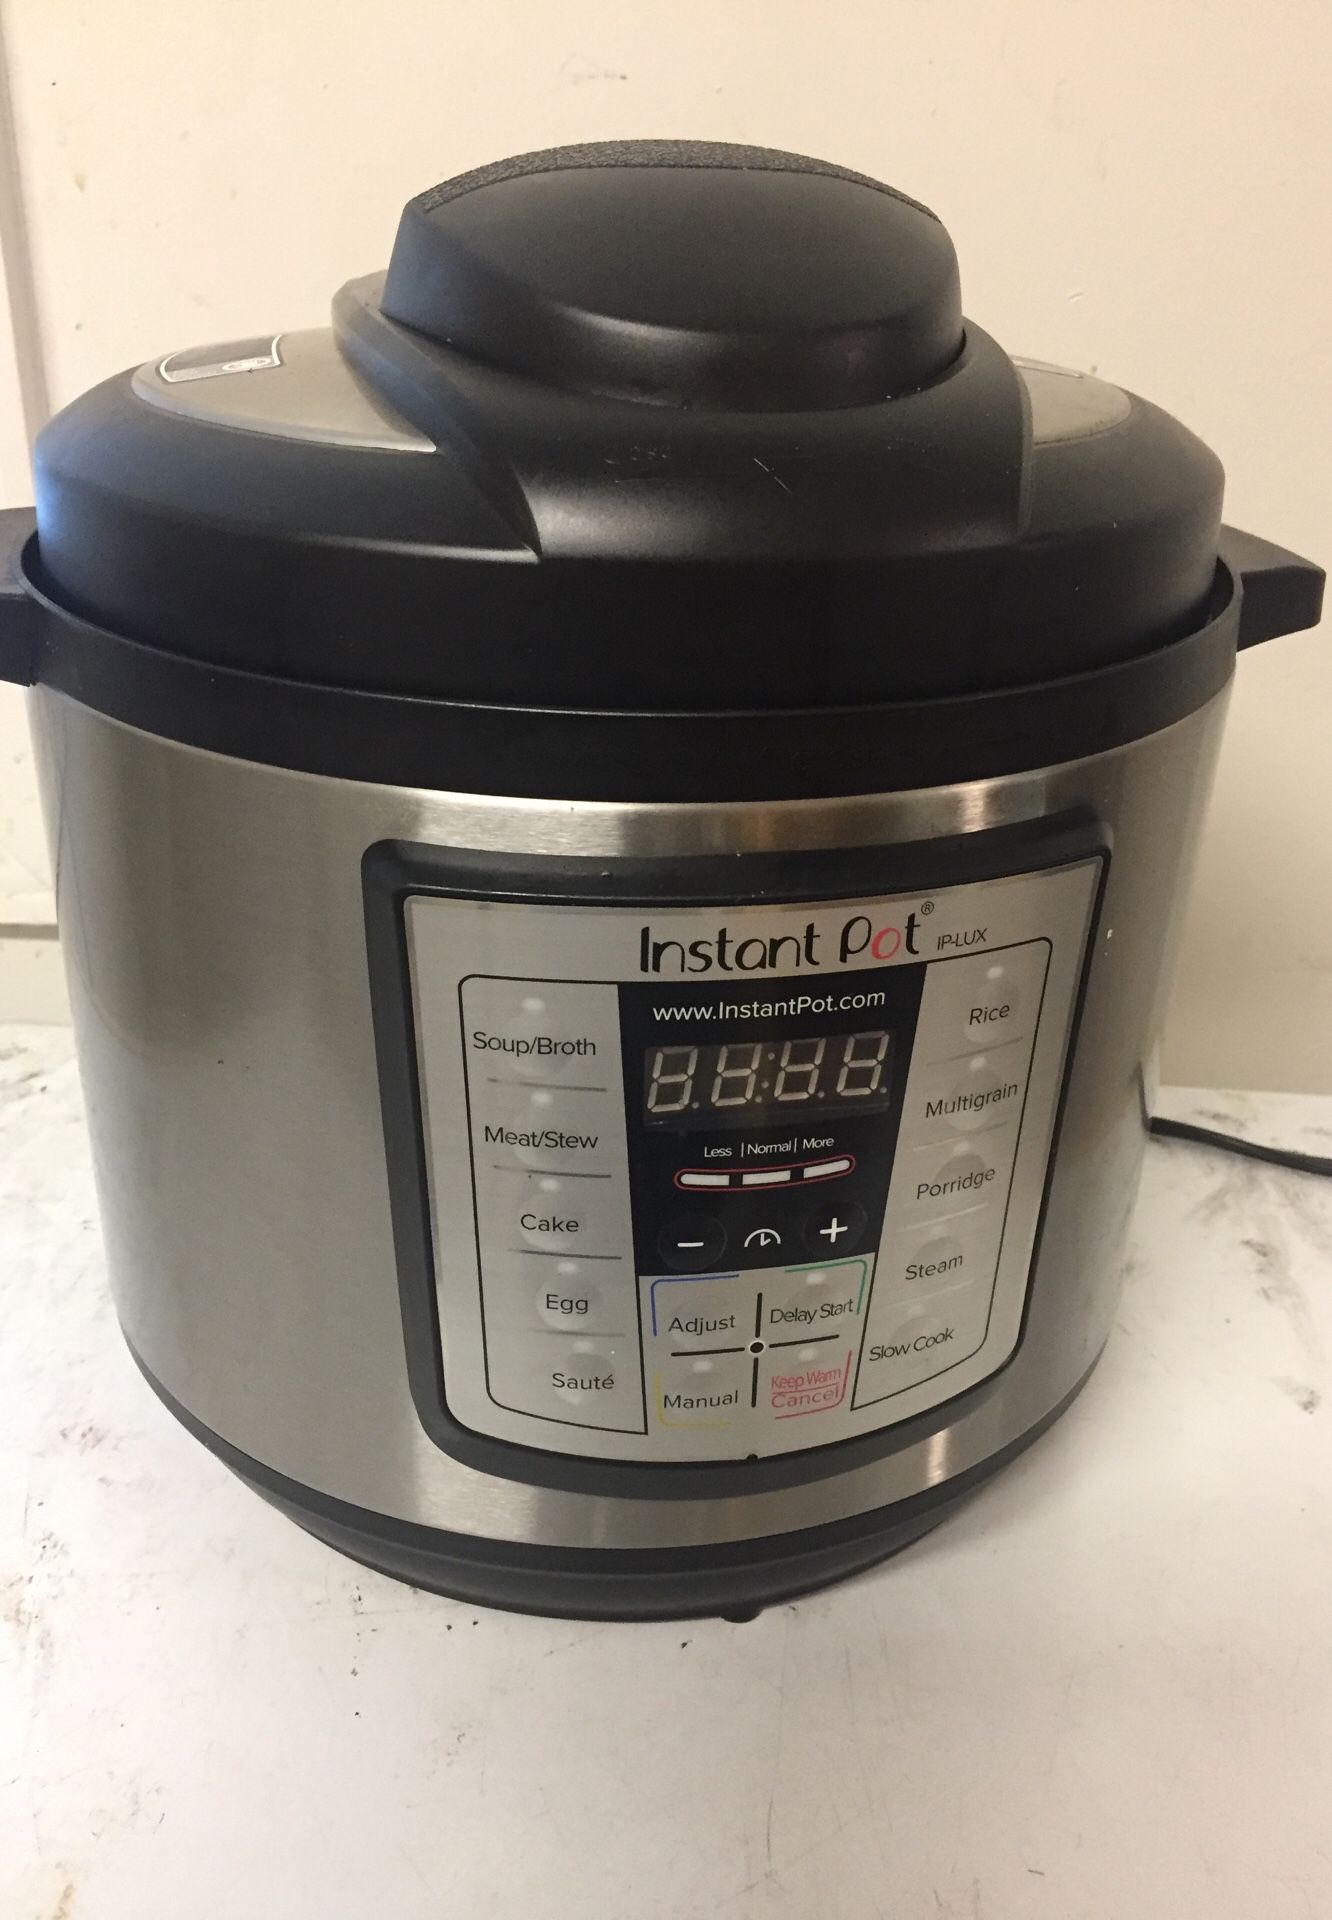 Instant Pot 6 in 1 Multi-Use Programmable Pressure Cooker